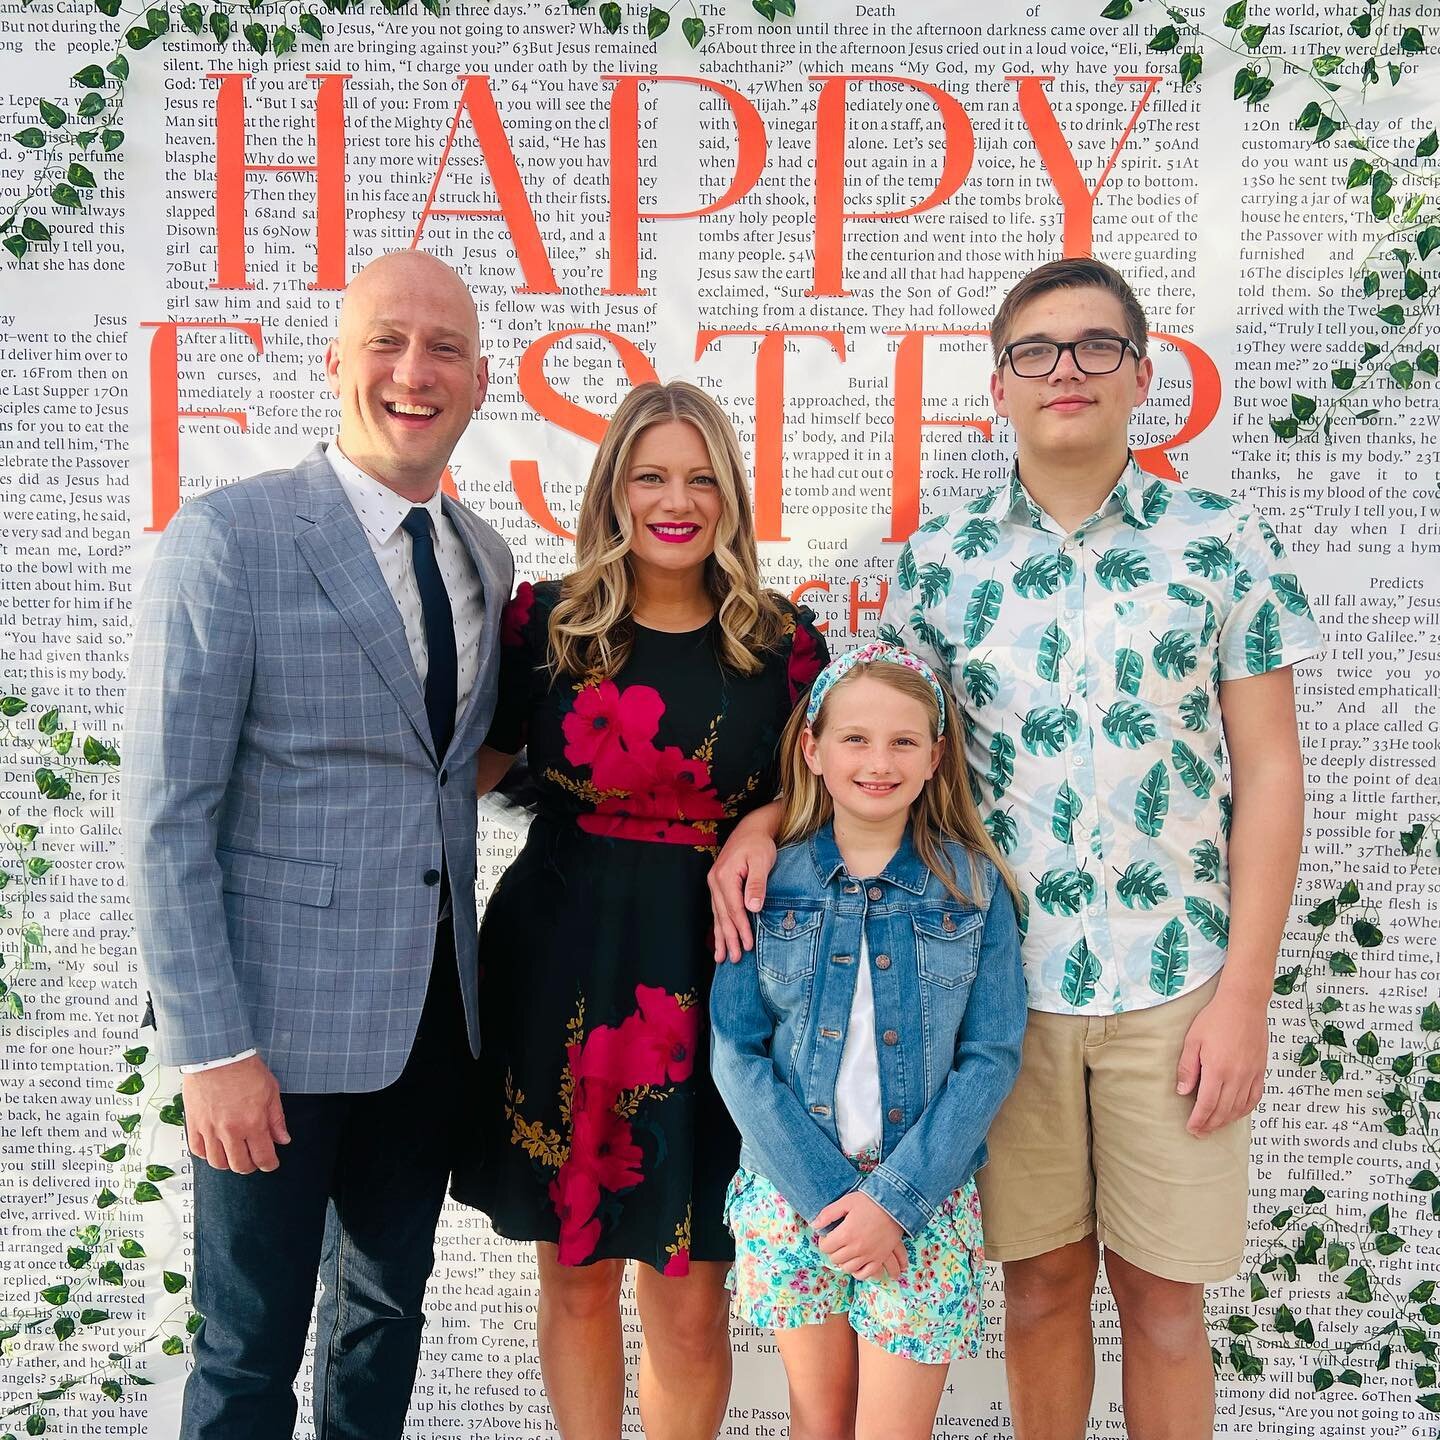 Happy Easter! 🌷🌿 ✝️

What a beautiful morning celebrating the resurrection with my @wearehopechapel family across the city. 

And watching all the kiddos faces light up as they walk through the egg factory never gets old! 

#heisrisenindeed #thegar